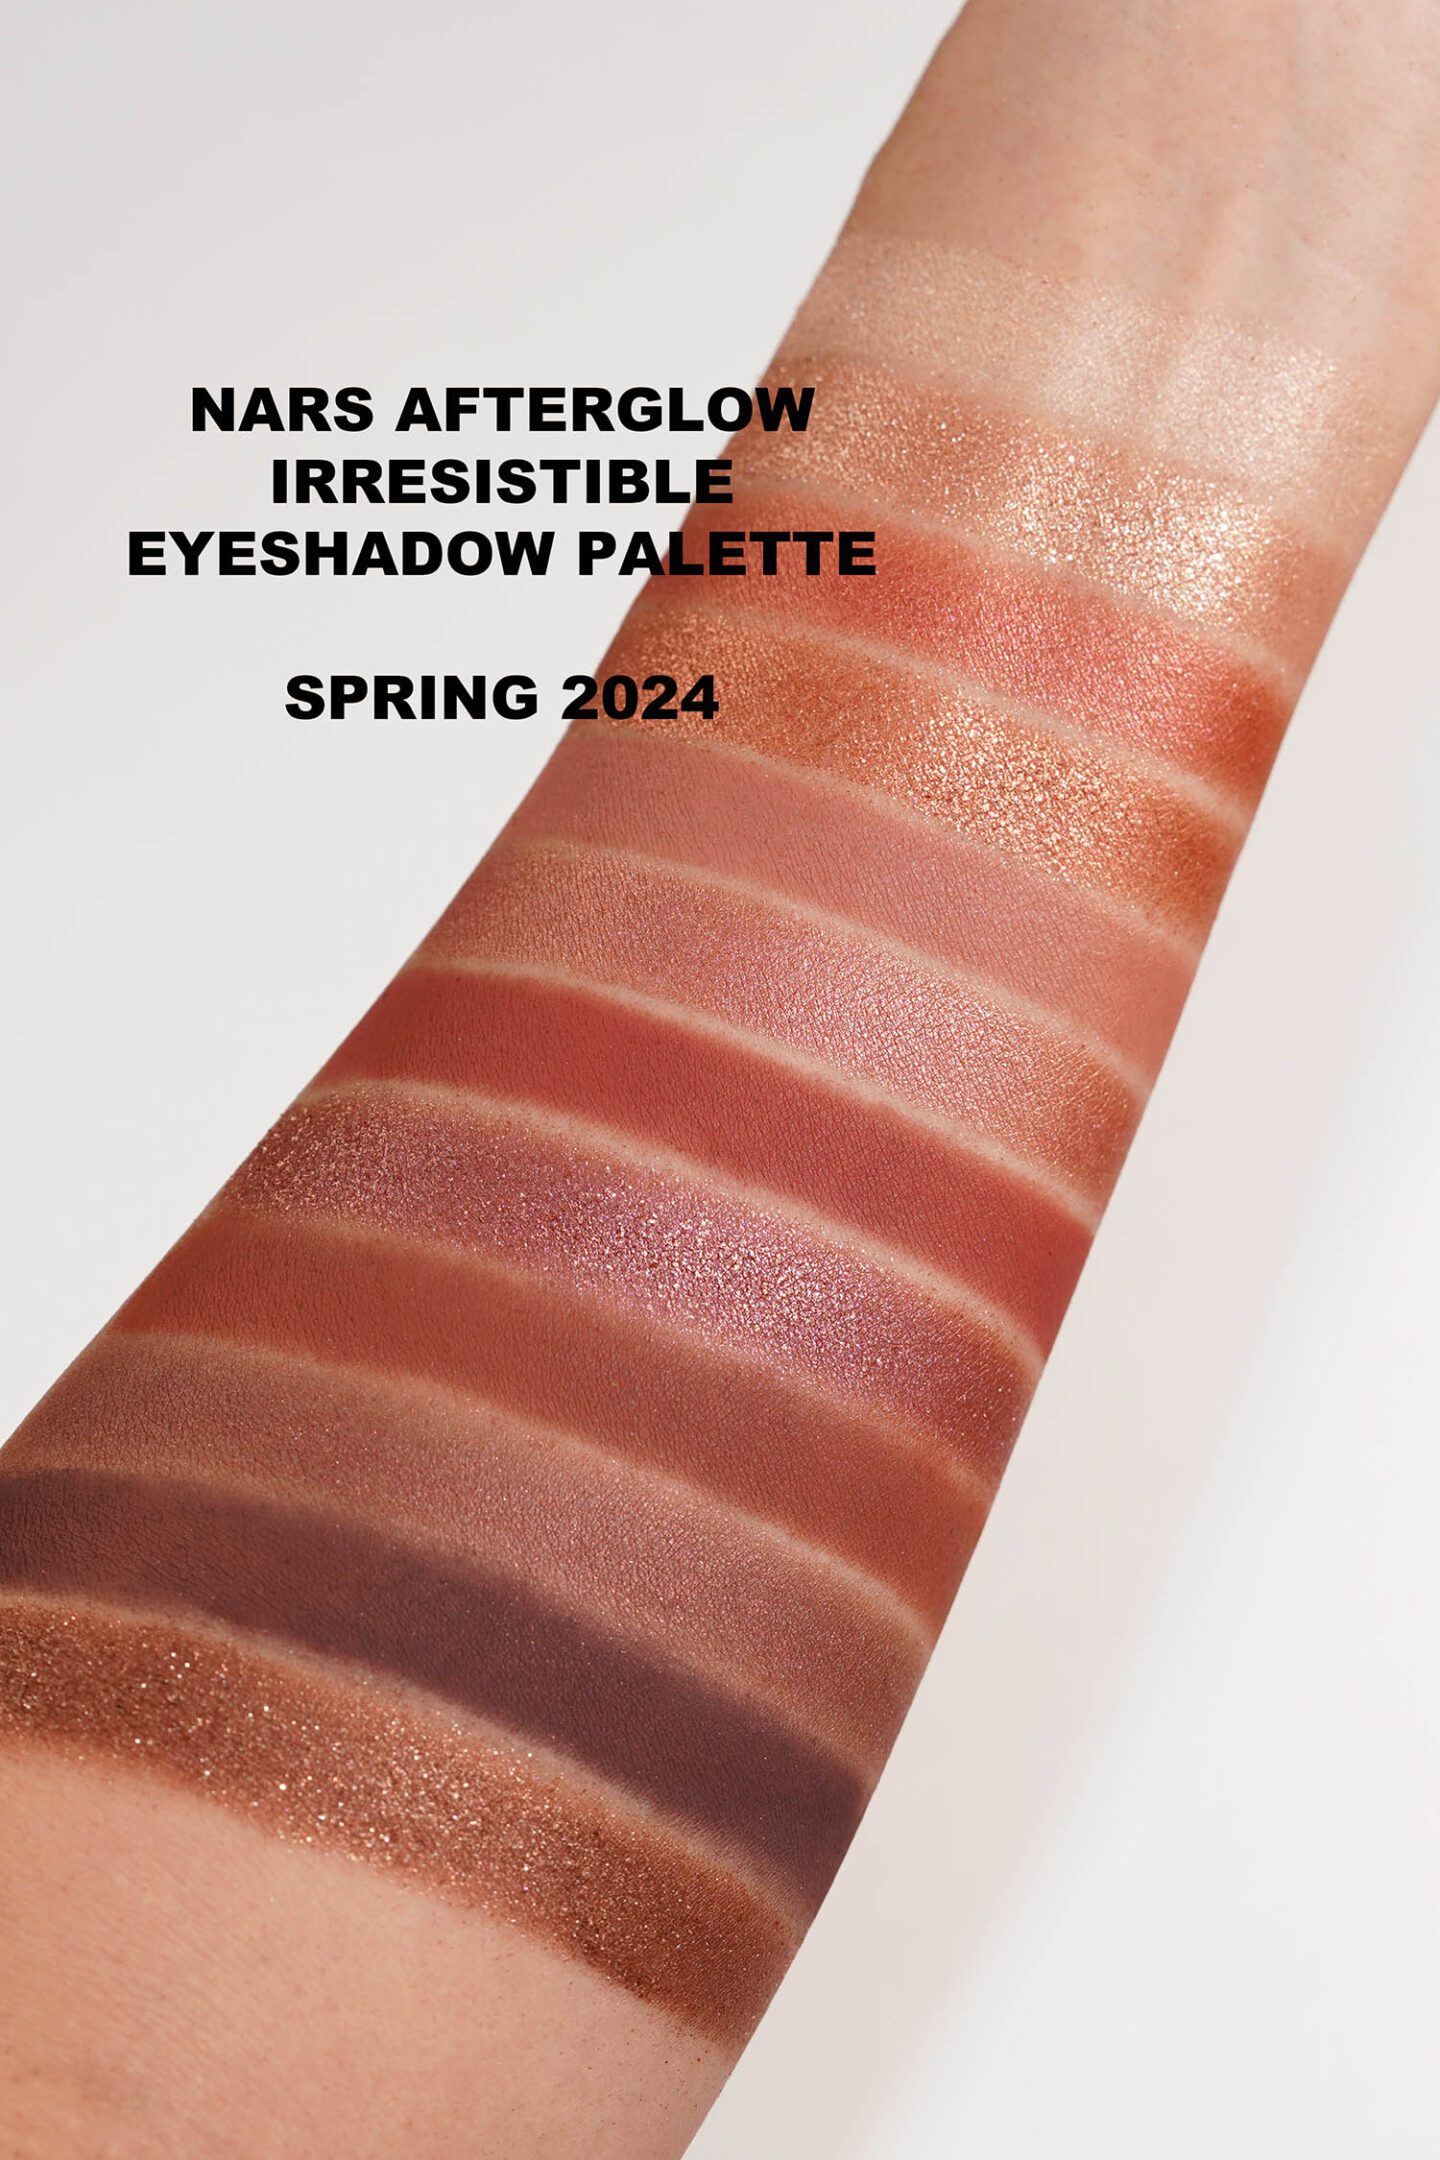 NARS Afterglow Irresistible Eyeshadow Palette swatches